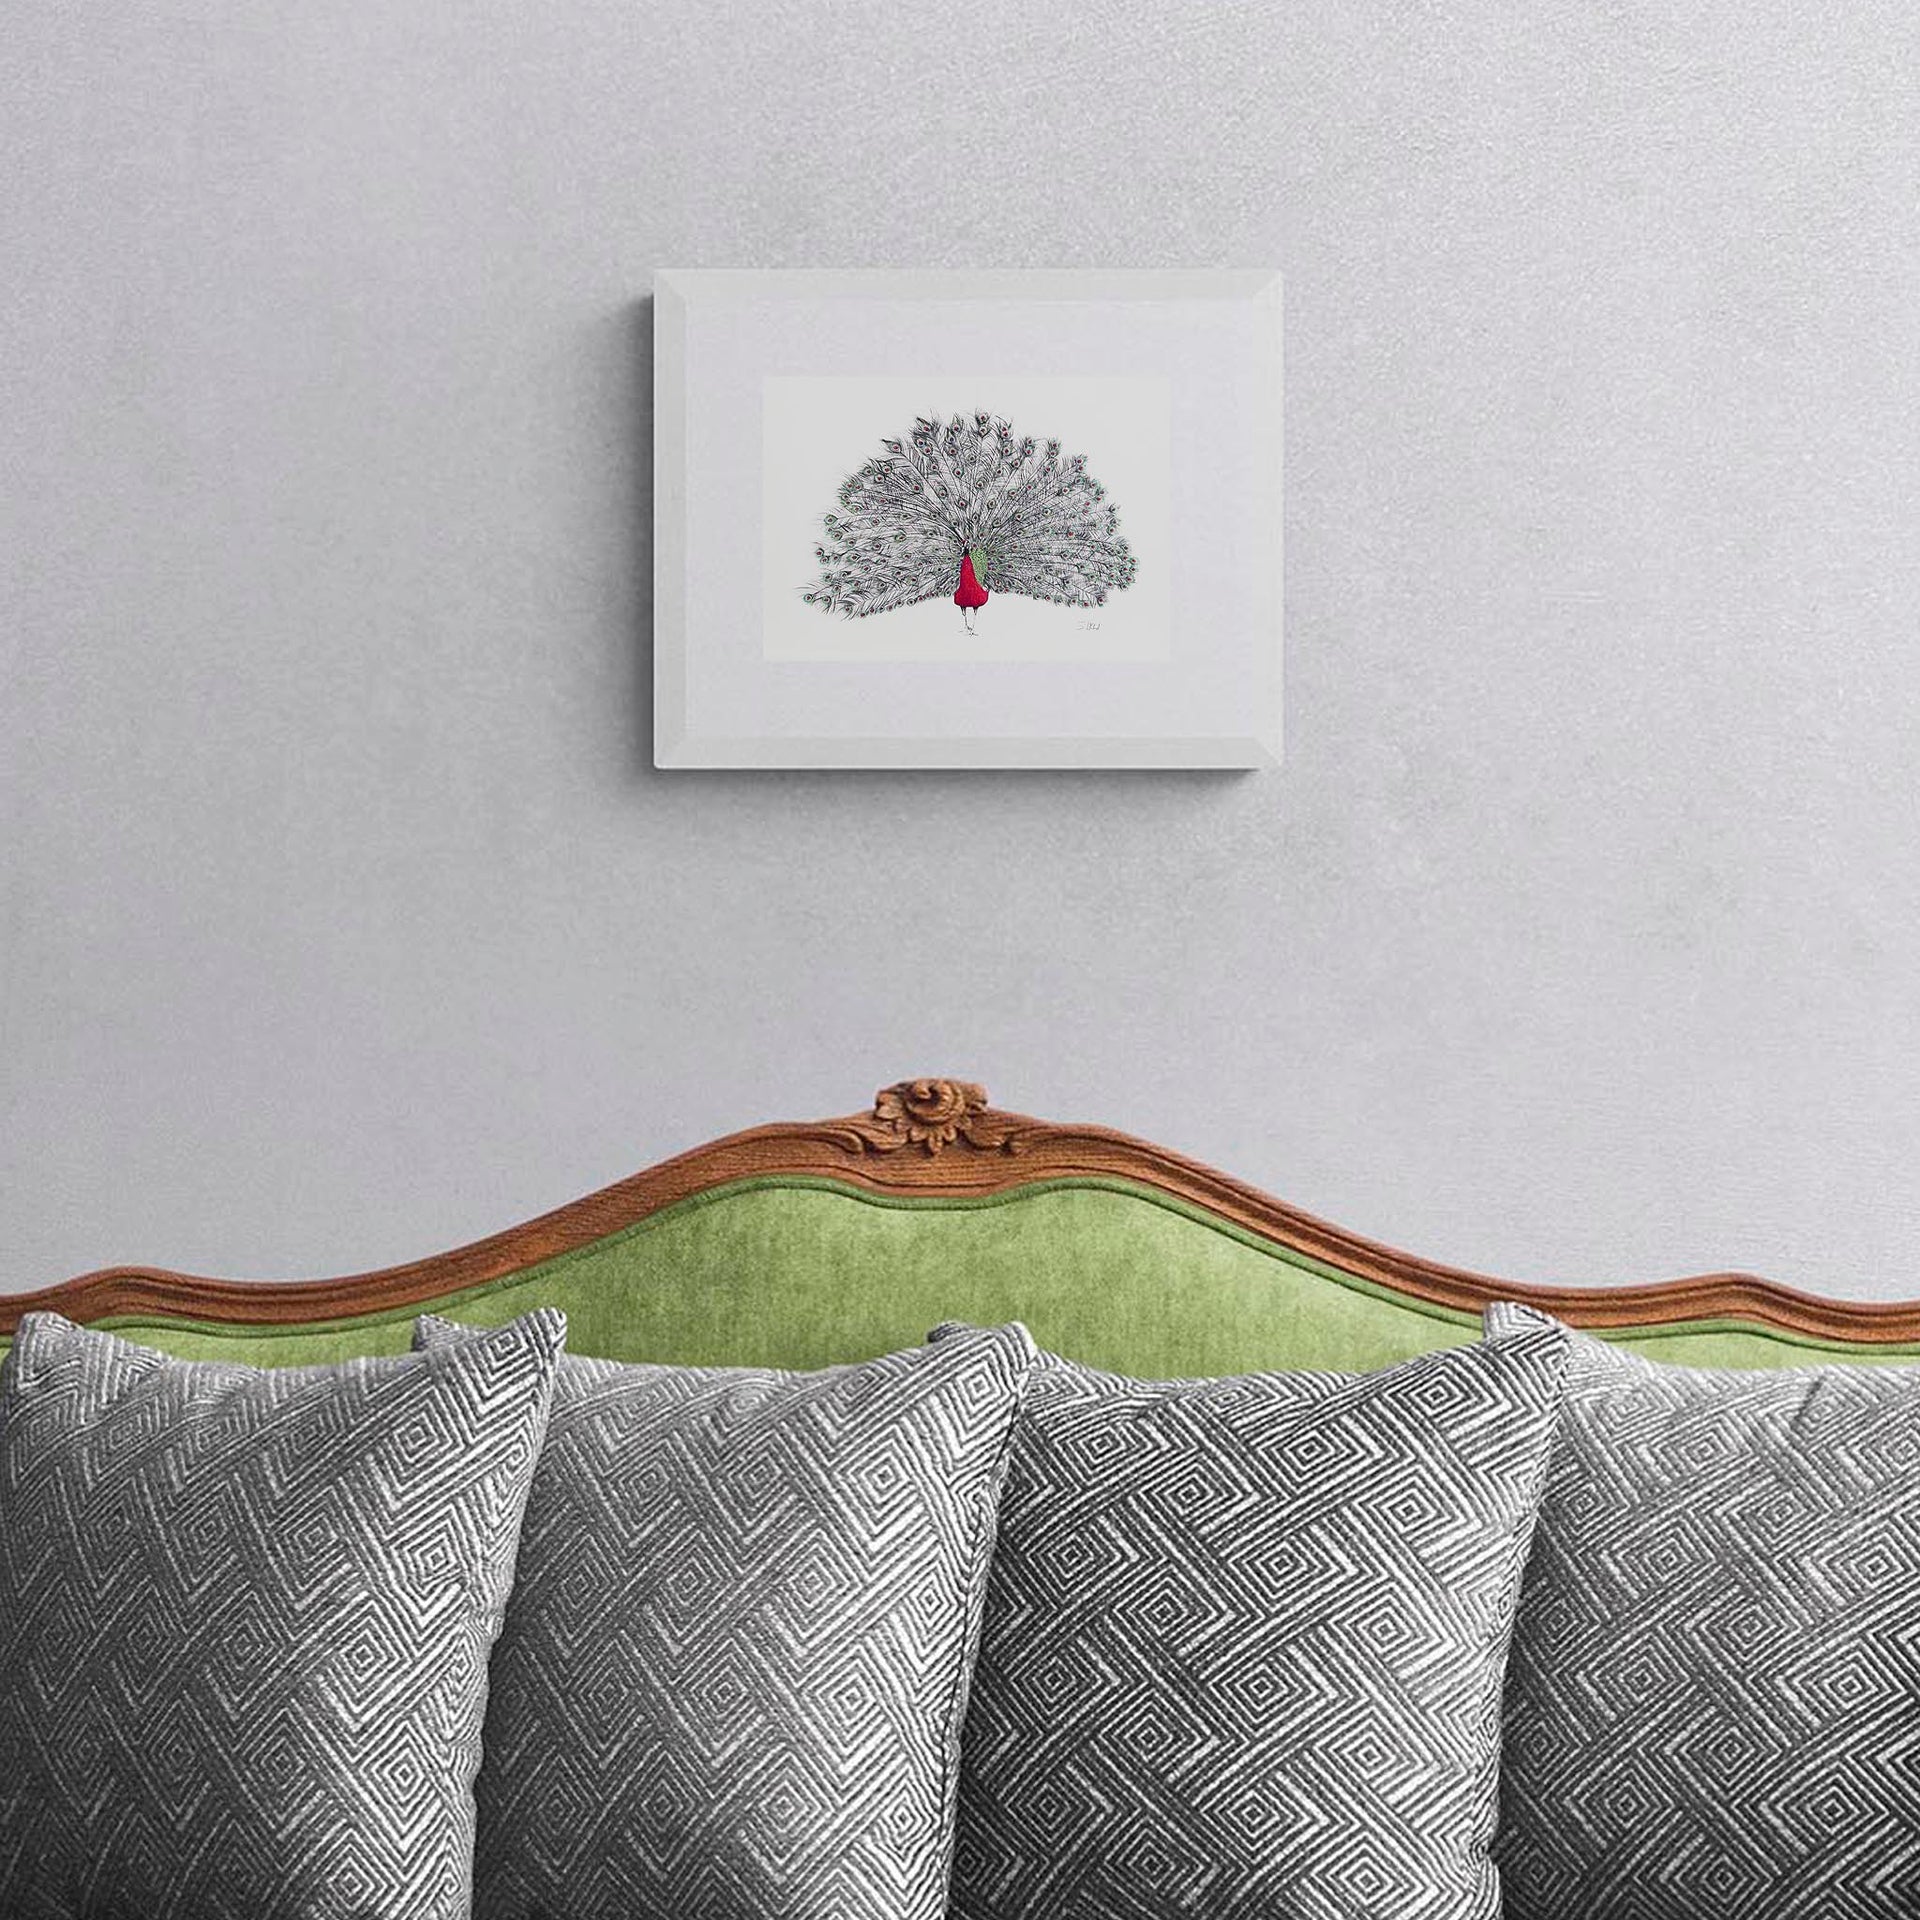 Peacock hand embroidered limited edition print in white frame on the wall